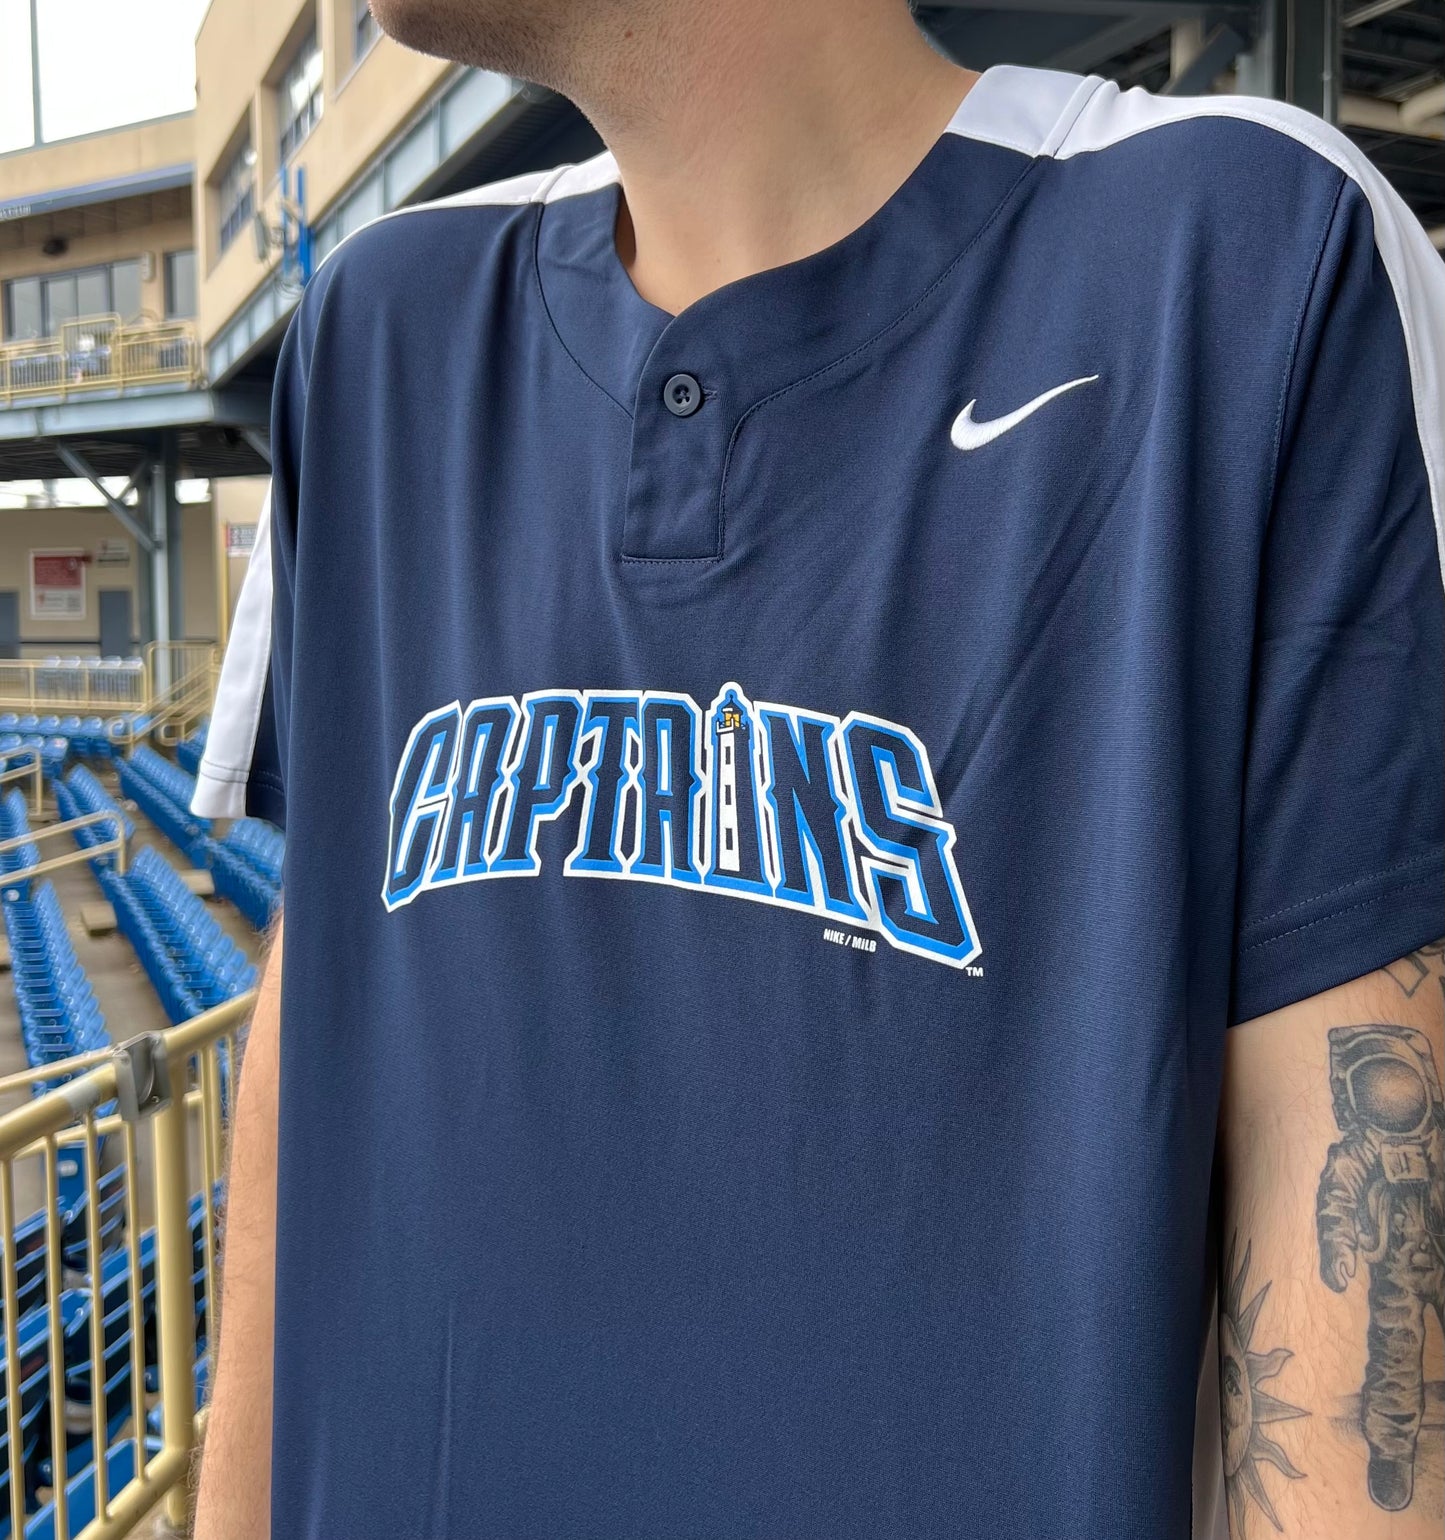 Adult Nike Captains Jersey